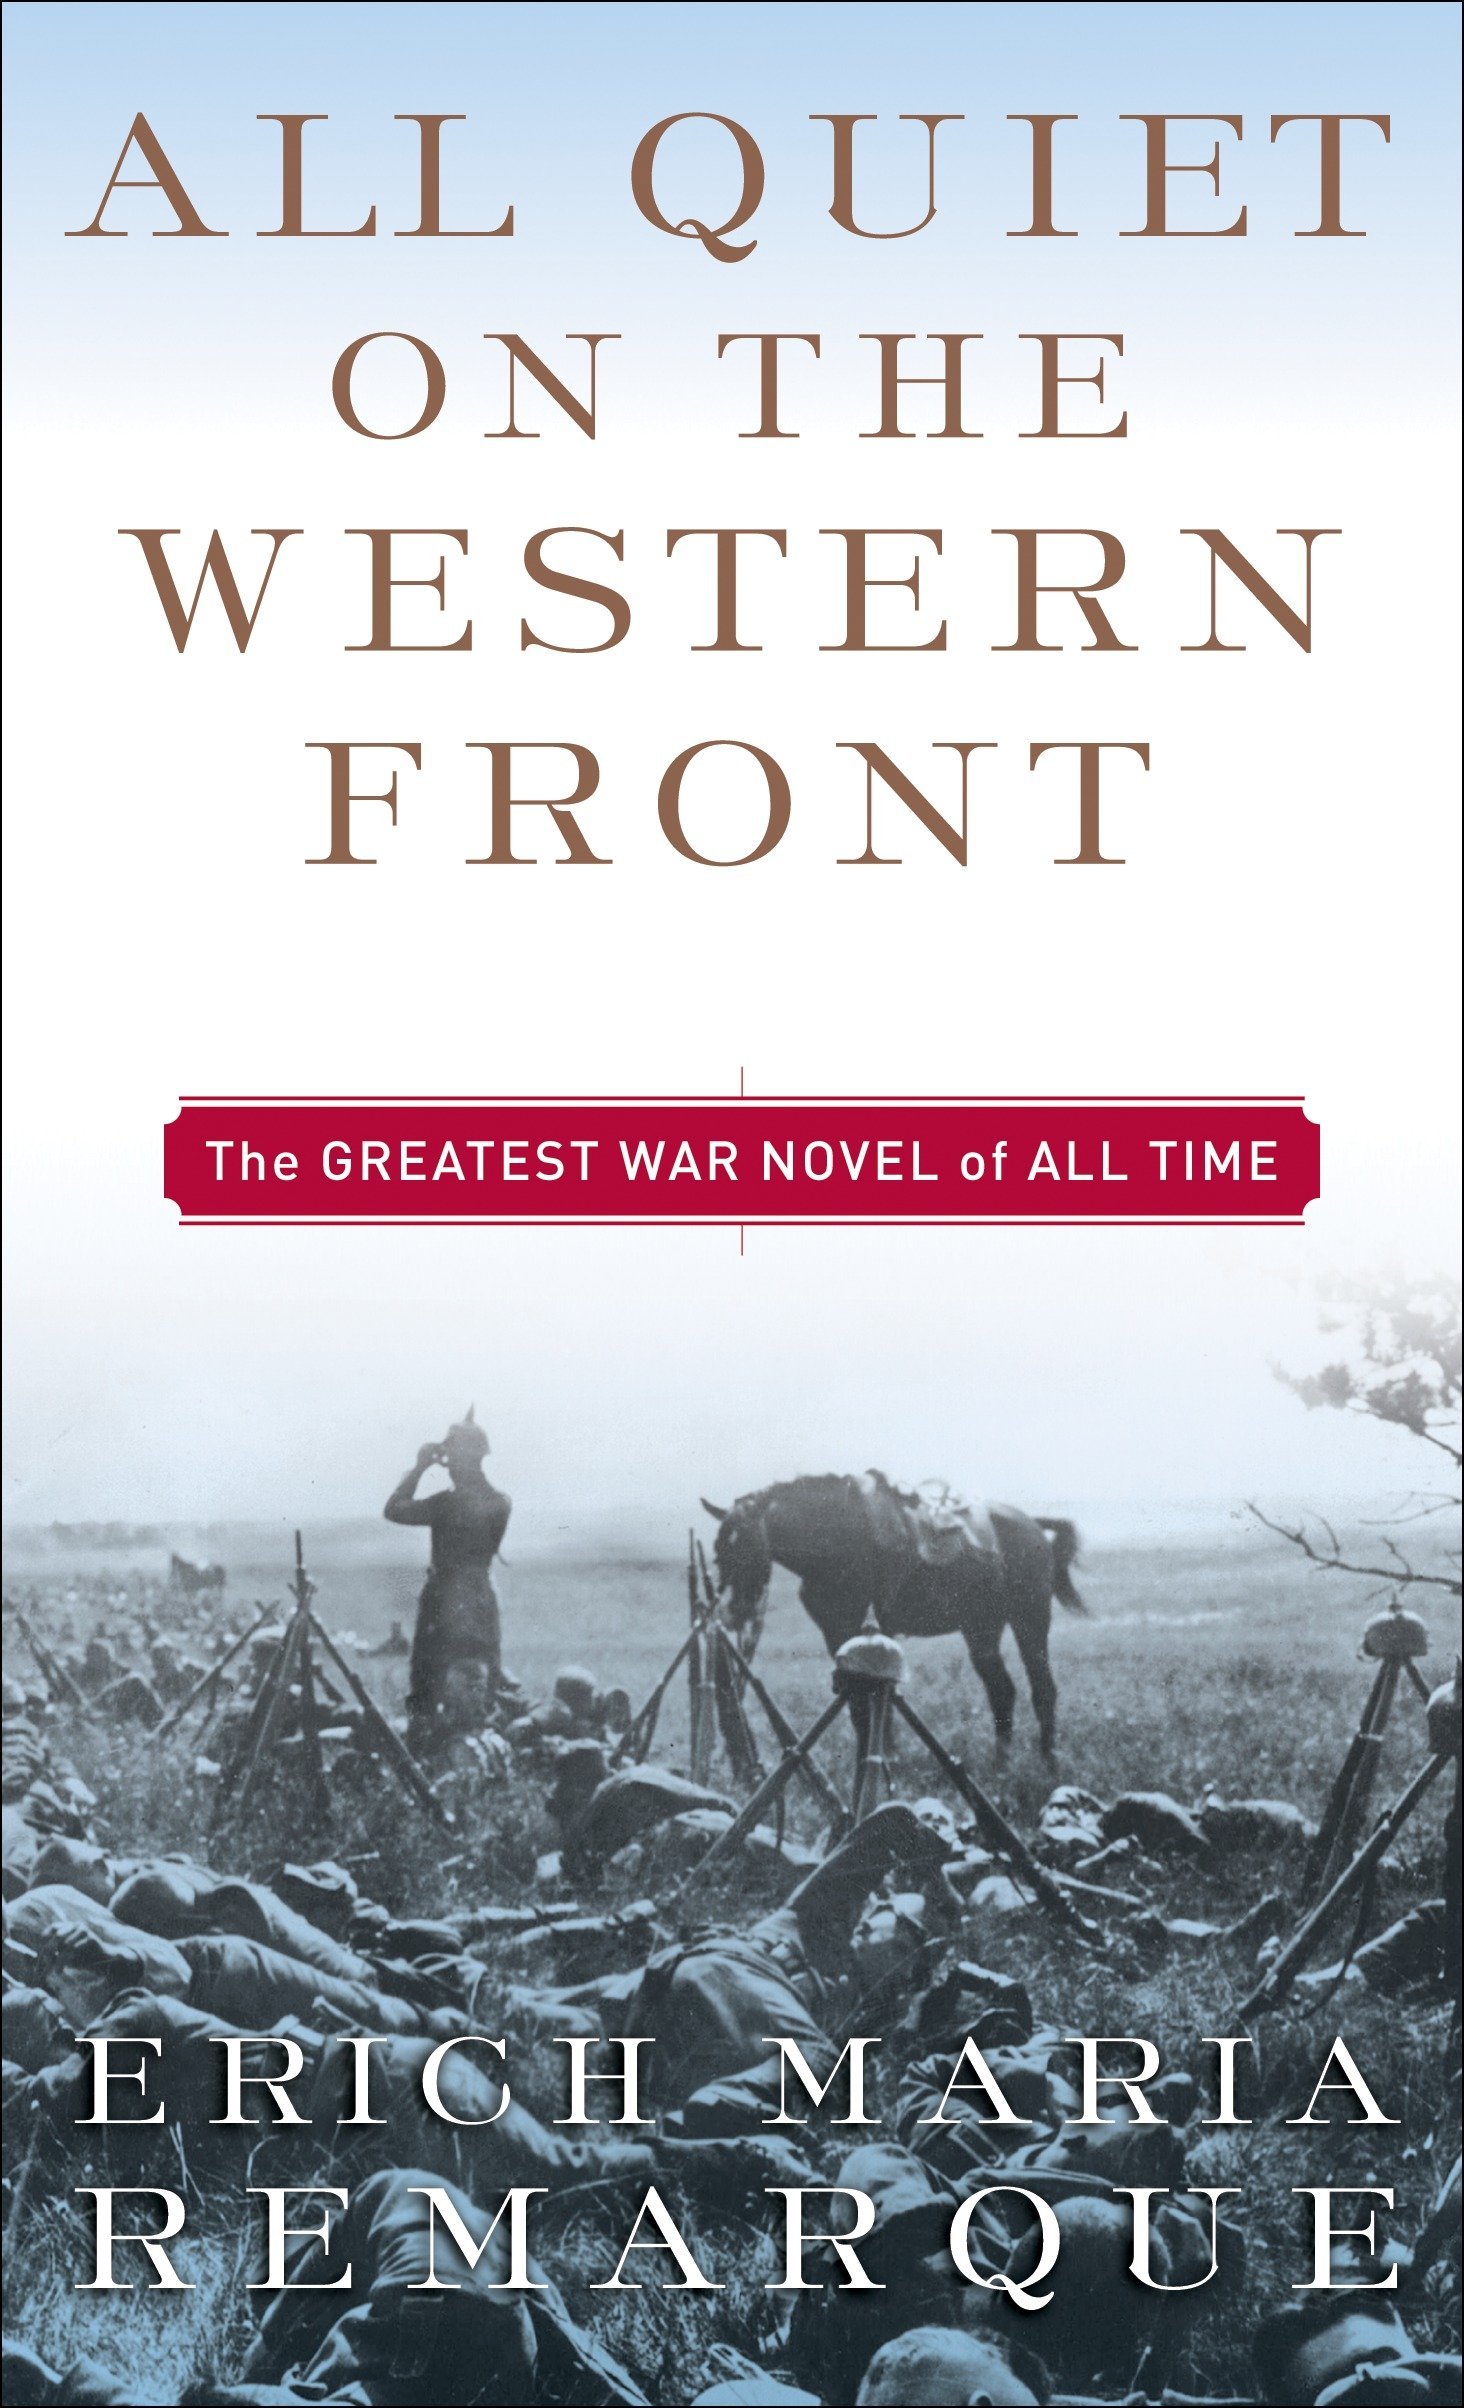 Image for "All Quiet on the Western Front"